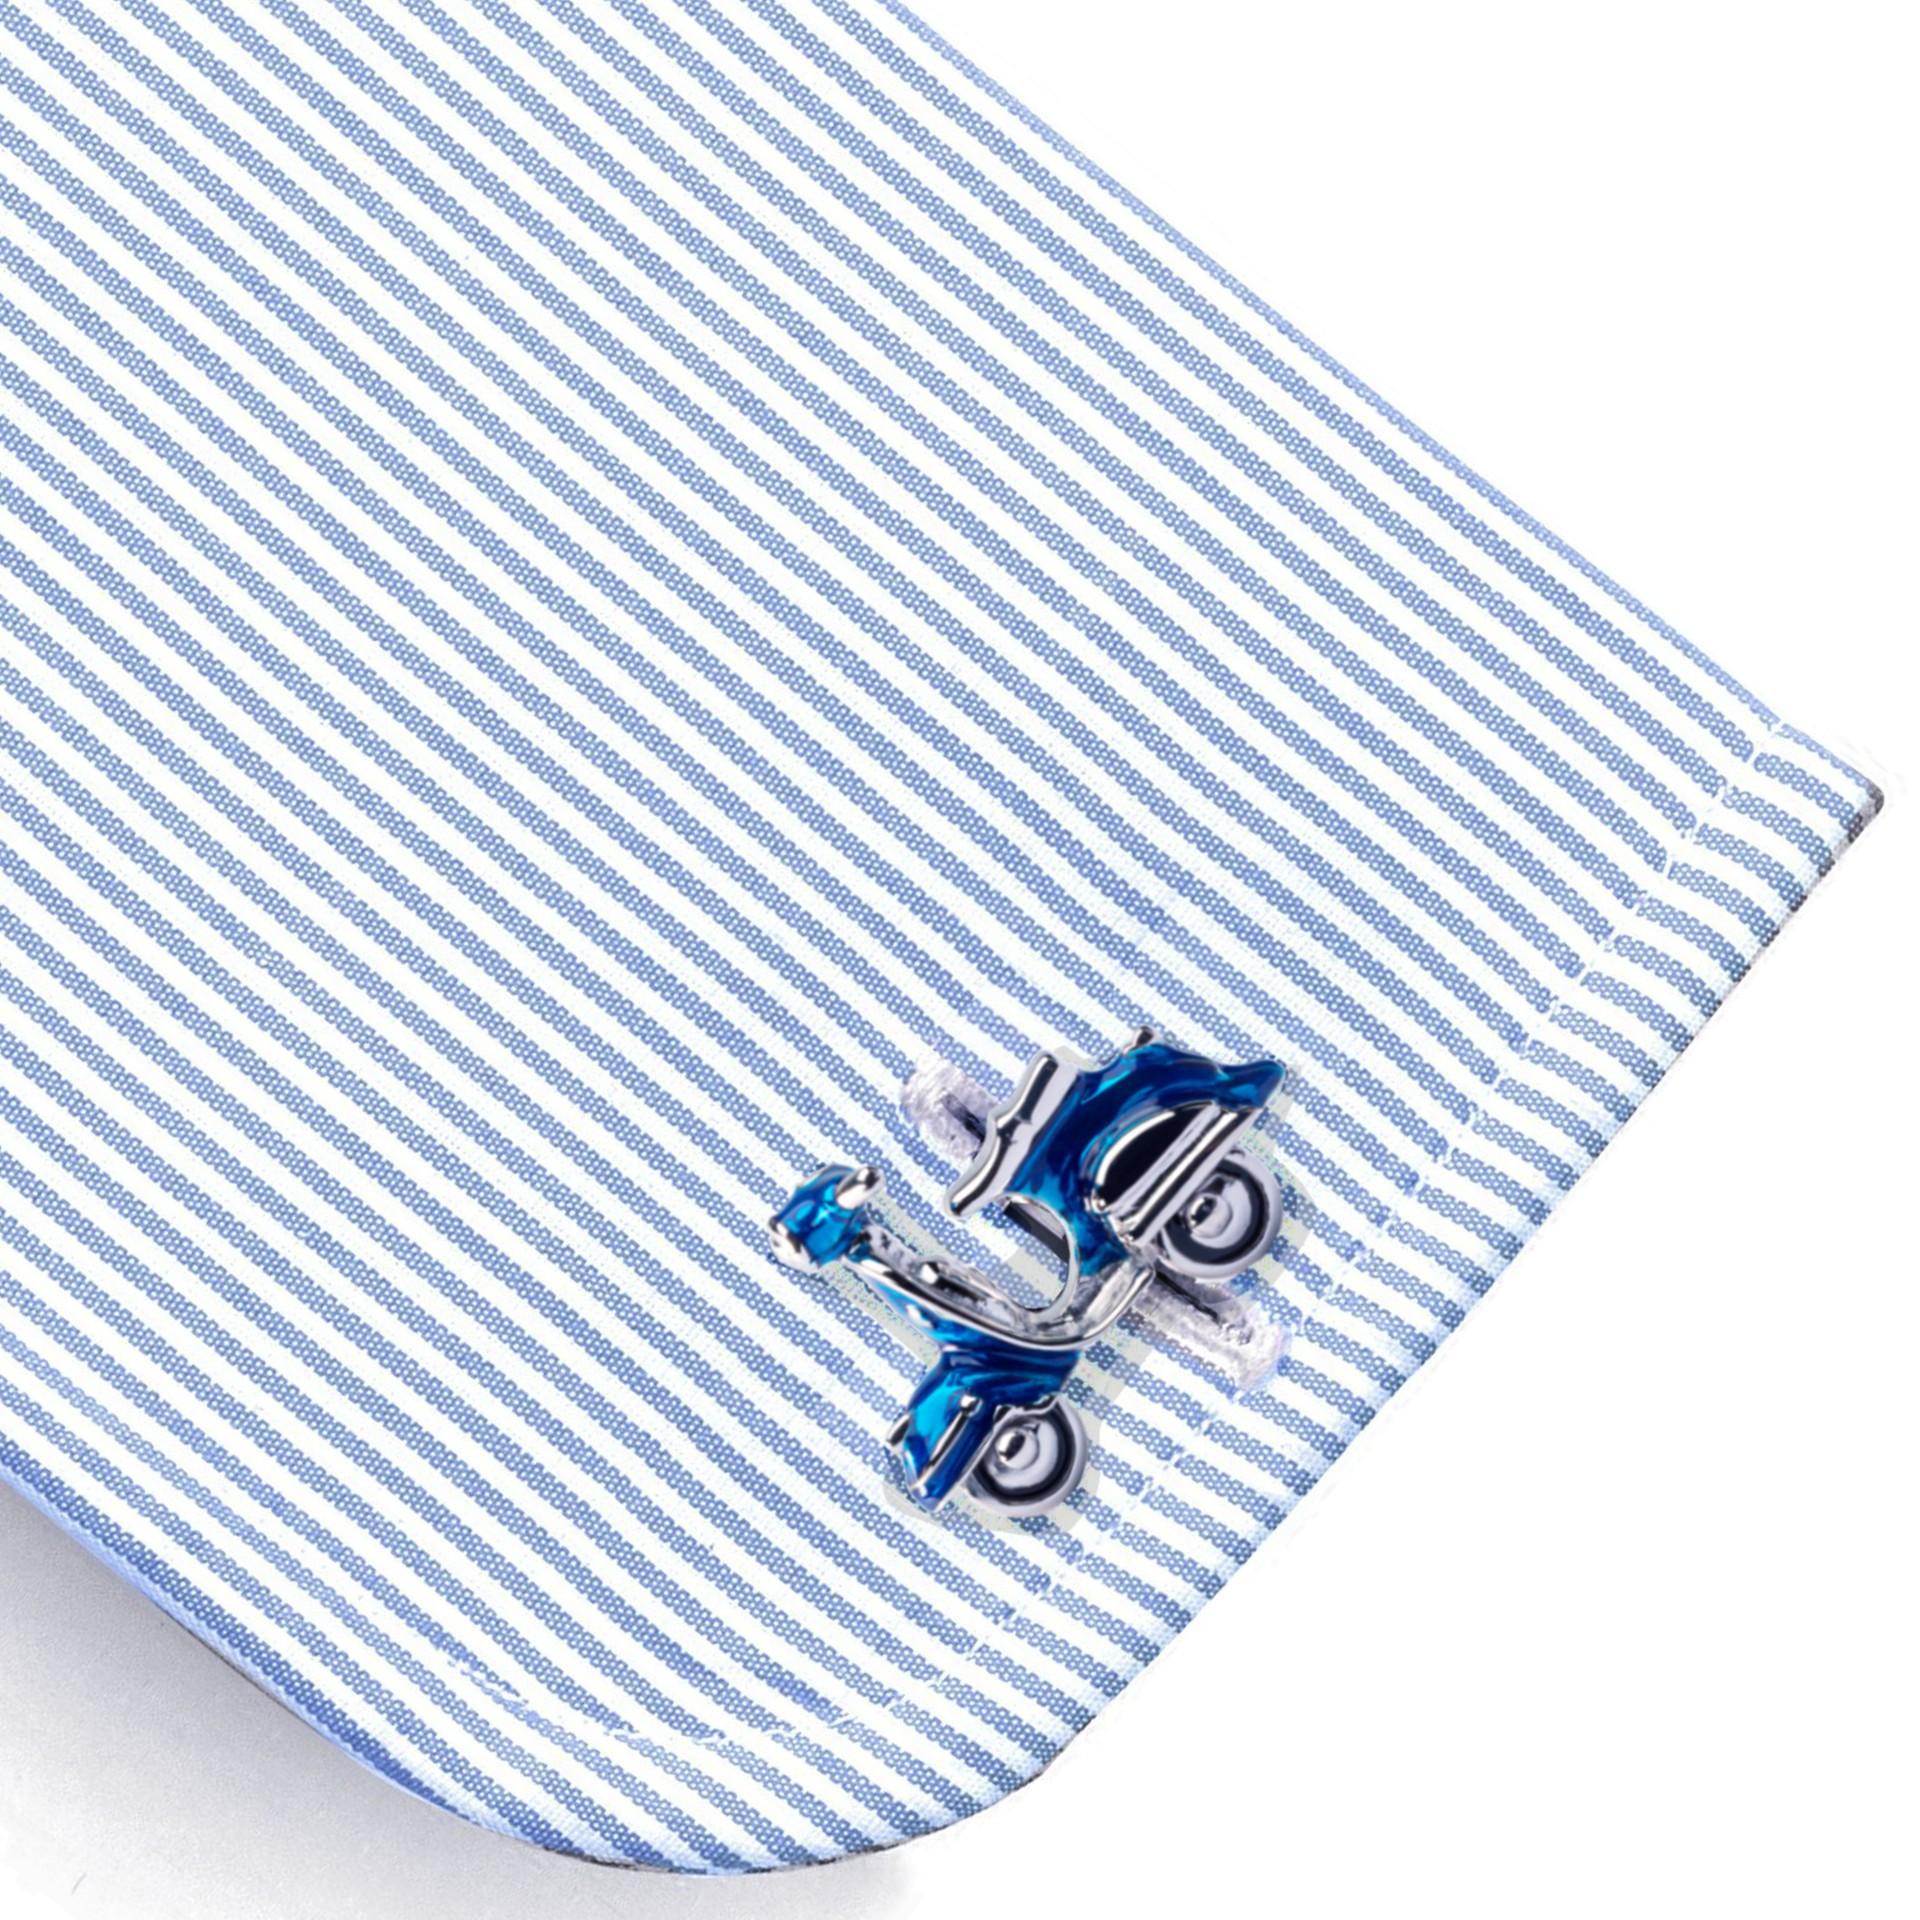 Alex Jona design collection, hand crafted in Italy, blue enamel sterling silver scooter cufflinks.
Dimensions : H 0.65 in x W 0.90 in x D 0.20 in - H 16.60 mm x W 23.05 mm X D 5.17 mm.

Alex Jona cufflinks stand out, not only for their special